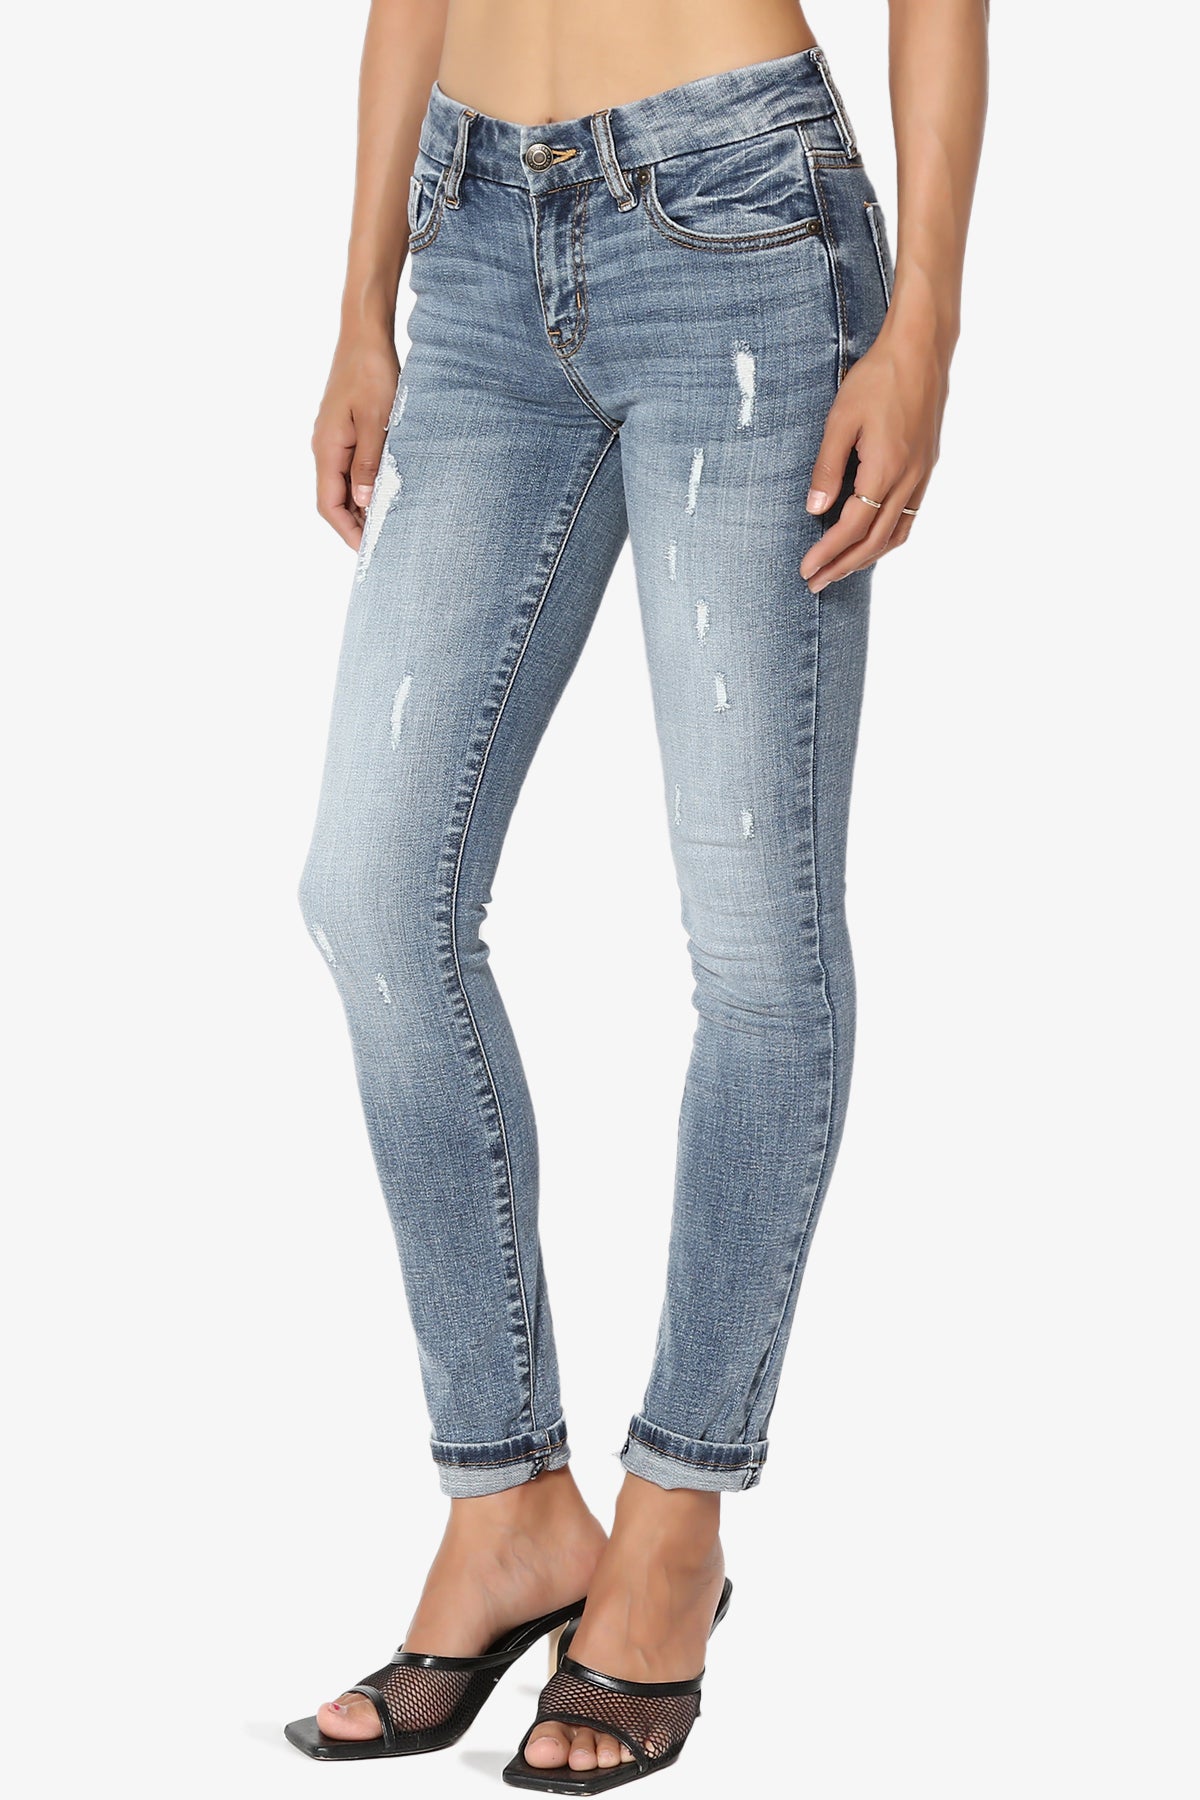 Load image into Gallery viewer, Greta Roll Up Skinny Jeans in Medium
